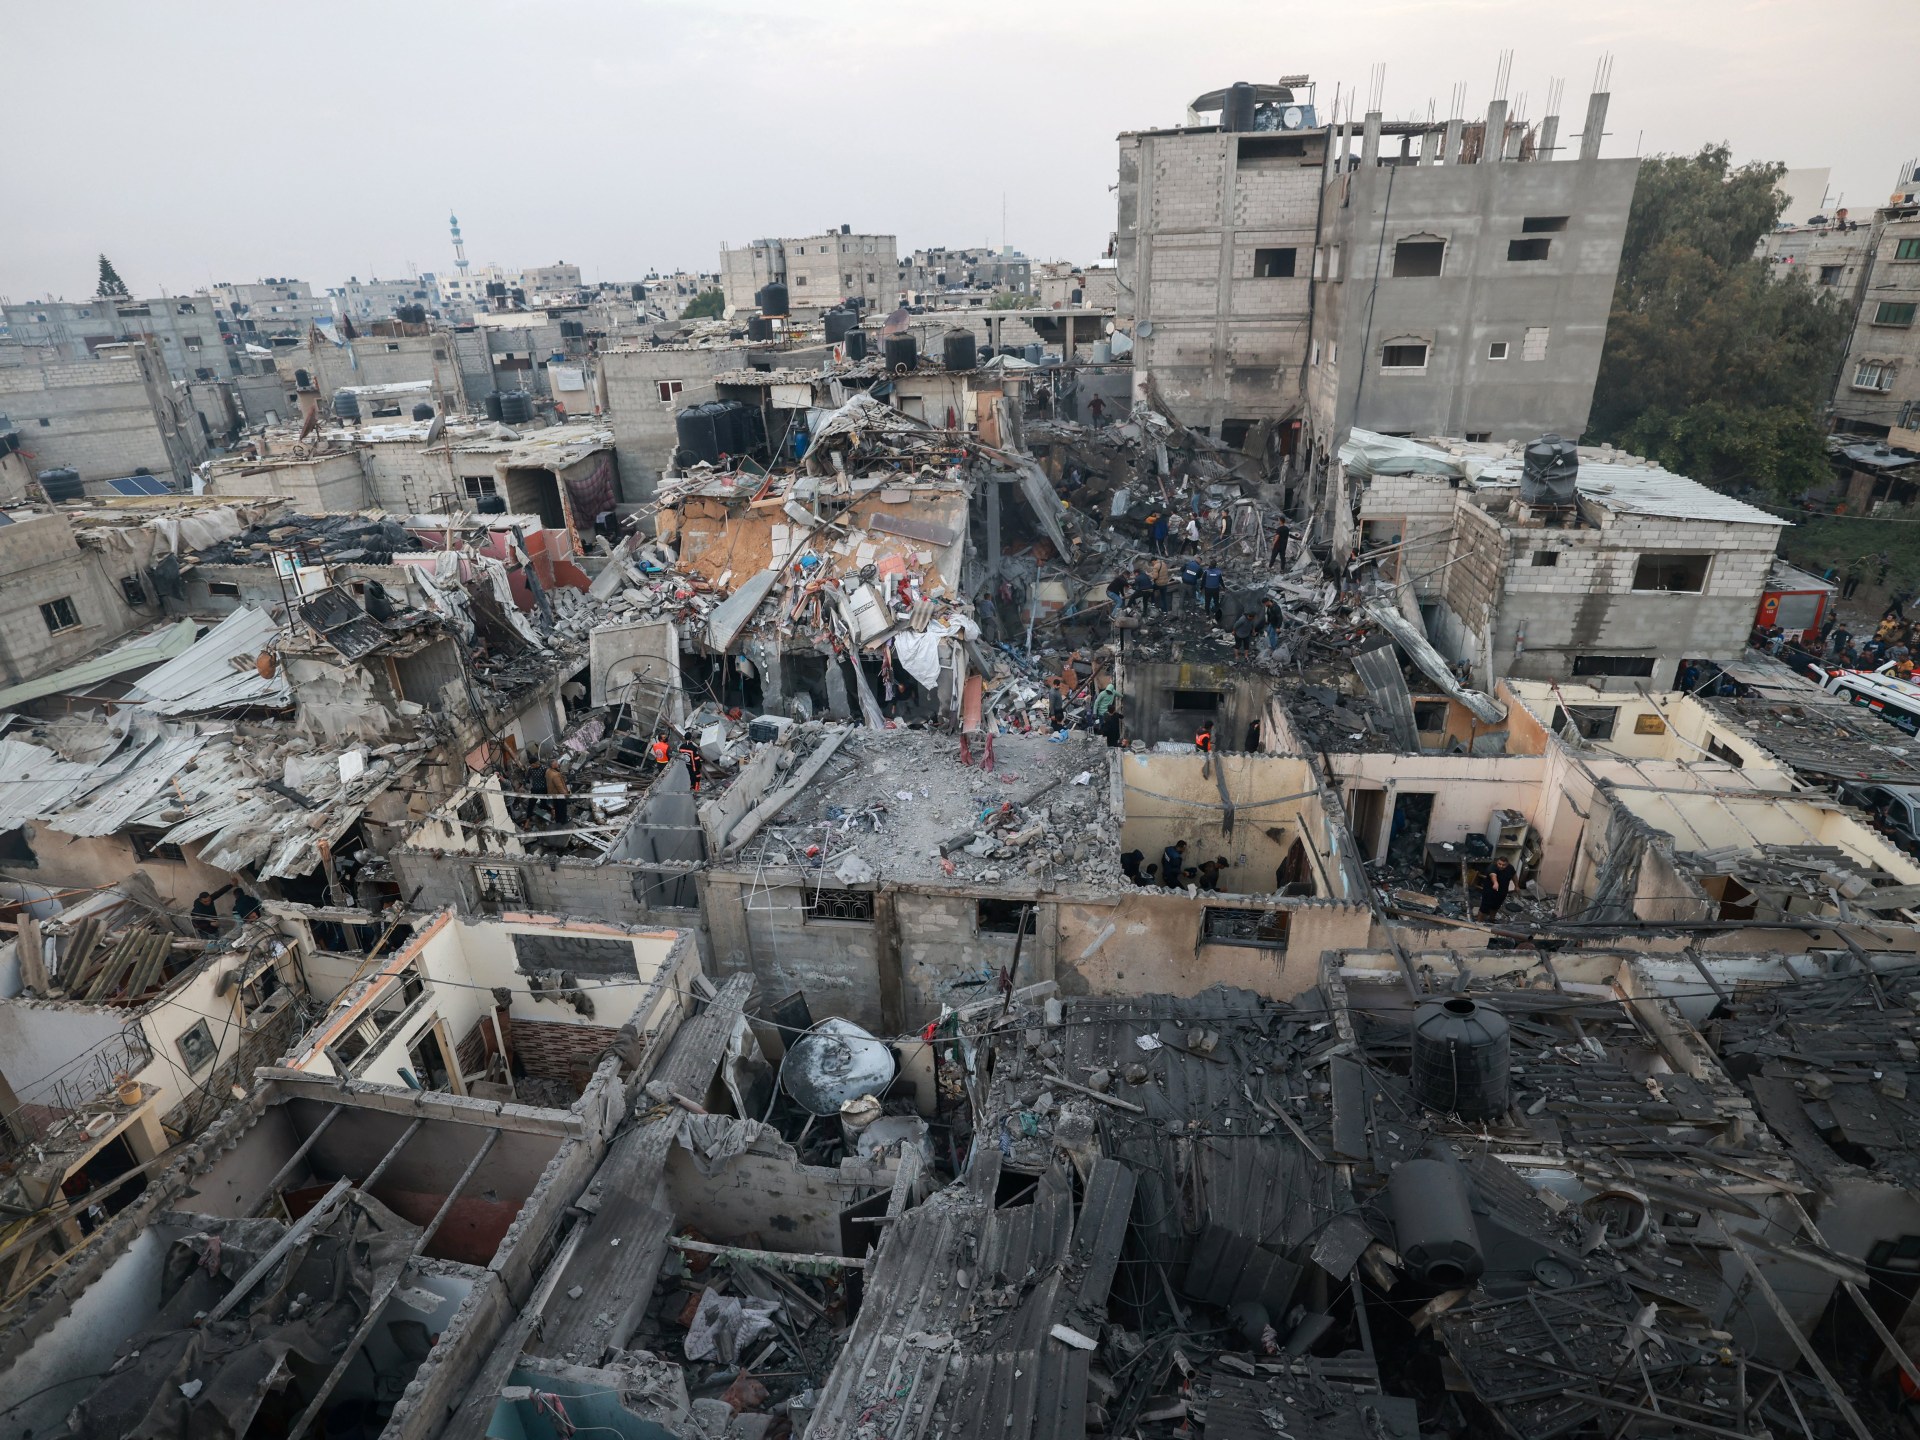 UN General Assembly votes overwhelmingly in favour of Gaza ceasefire | Israel-Palestine conflict News #General #Assembly #votes #overwhelmingly #favour #Gaza #ceasefire #IsraelPalestine #conflict #News